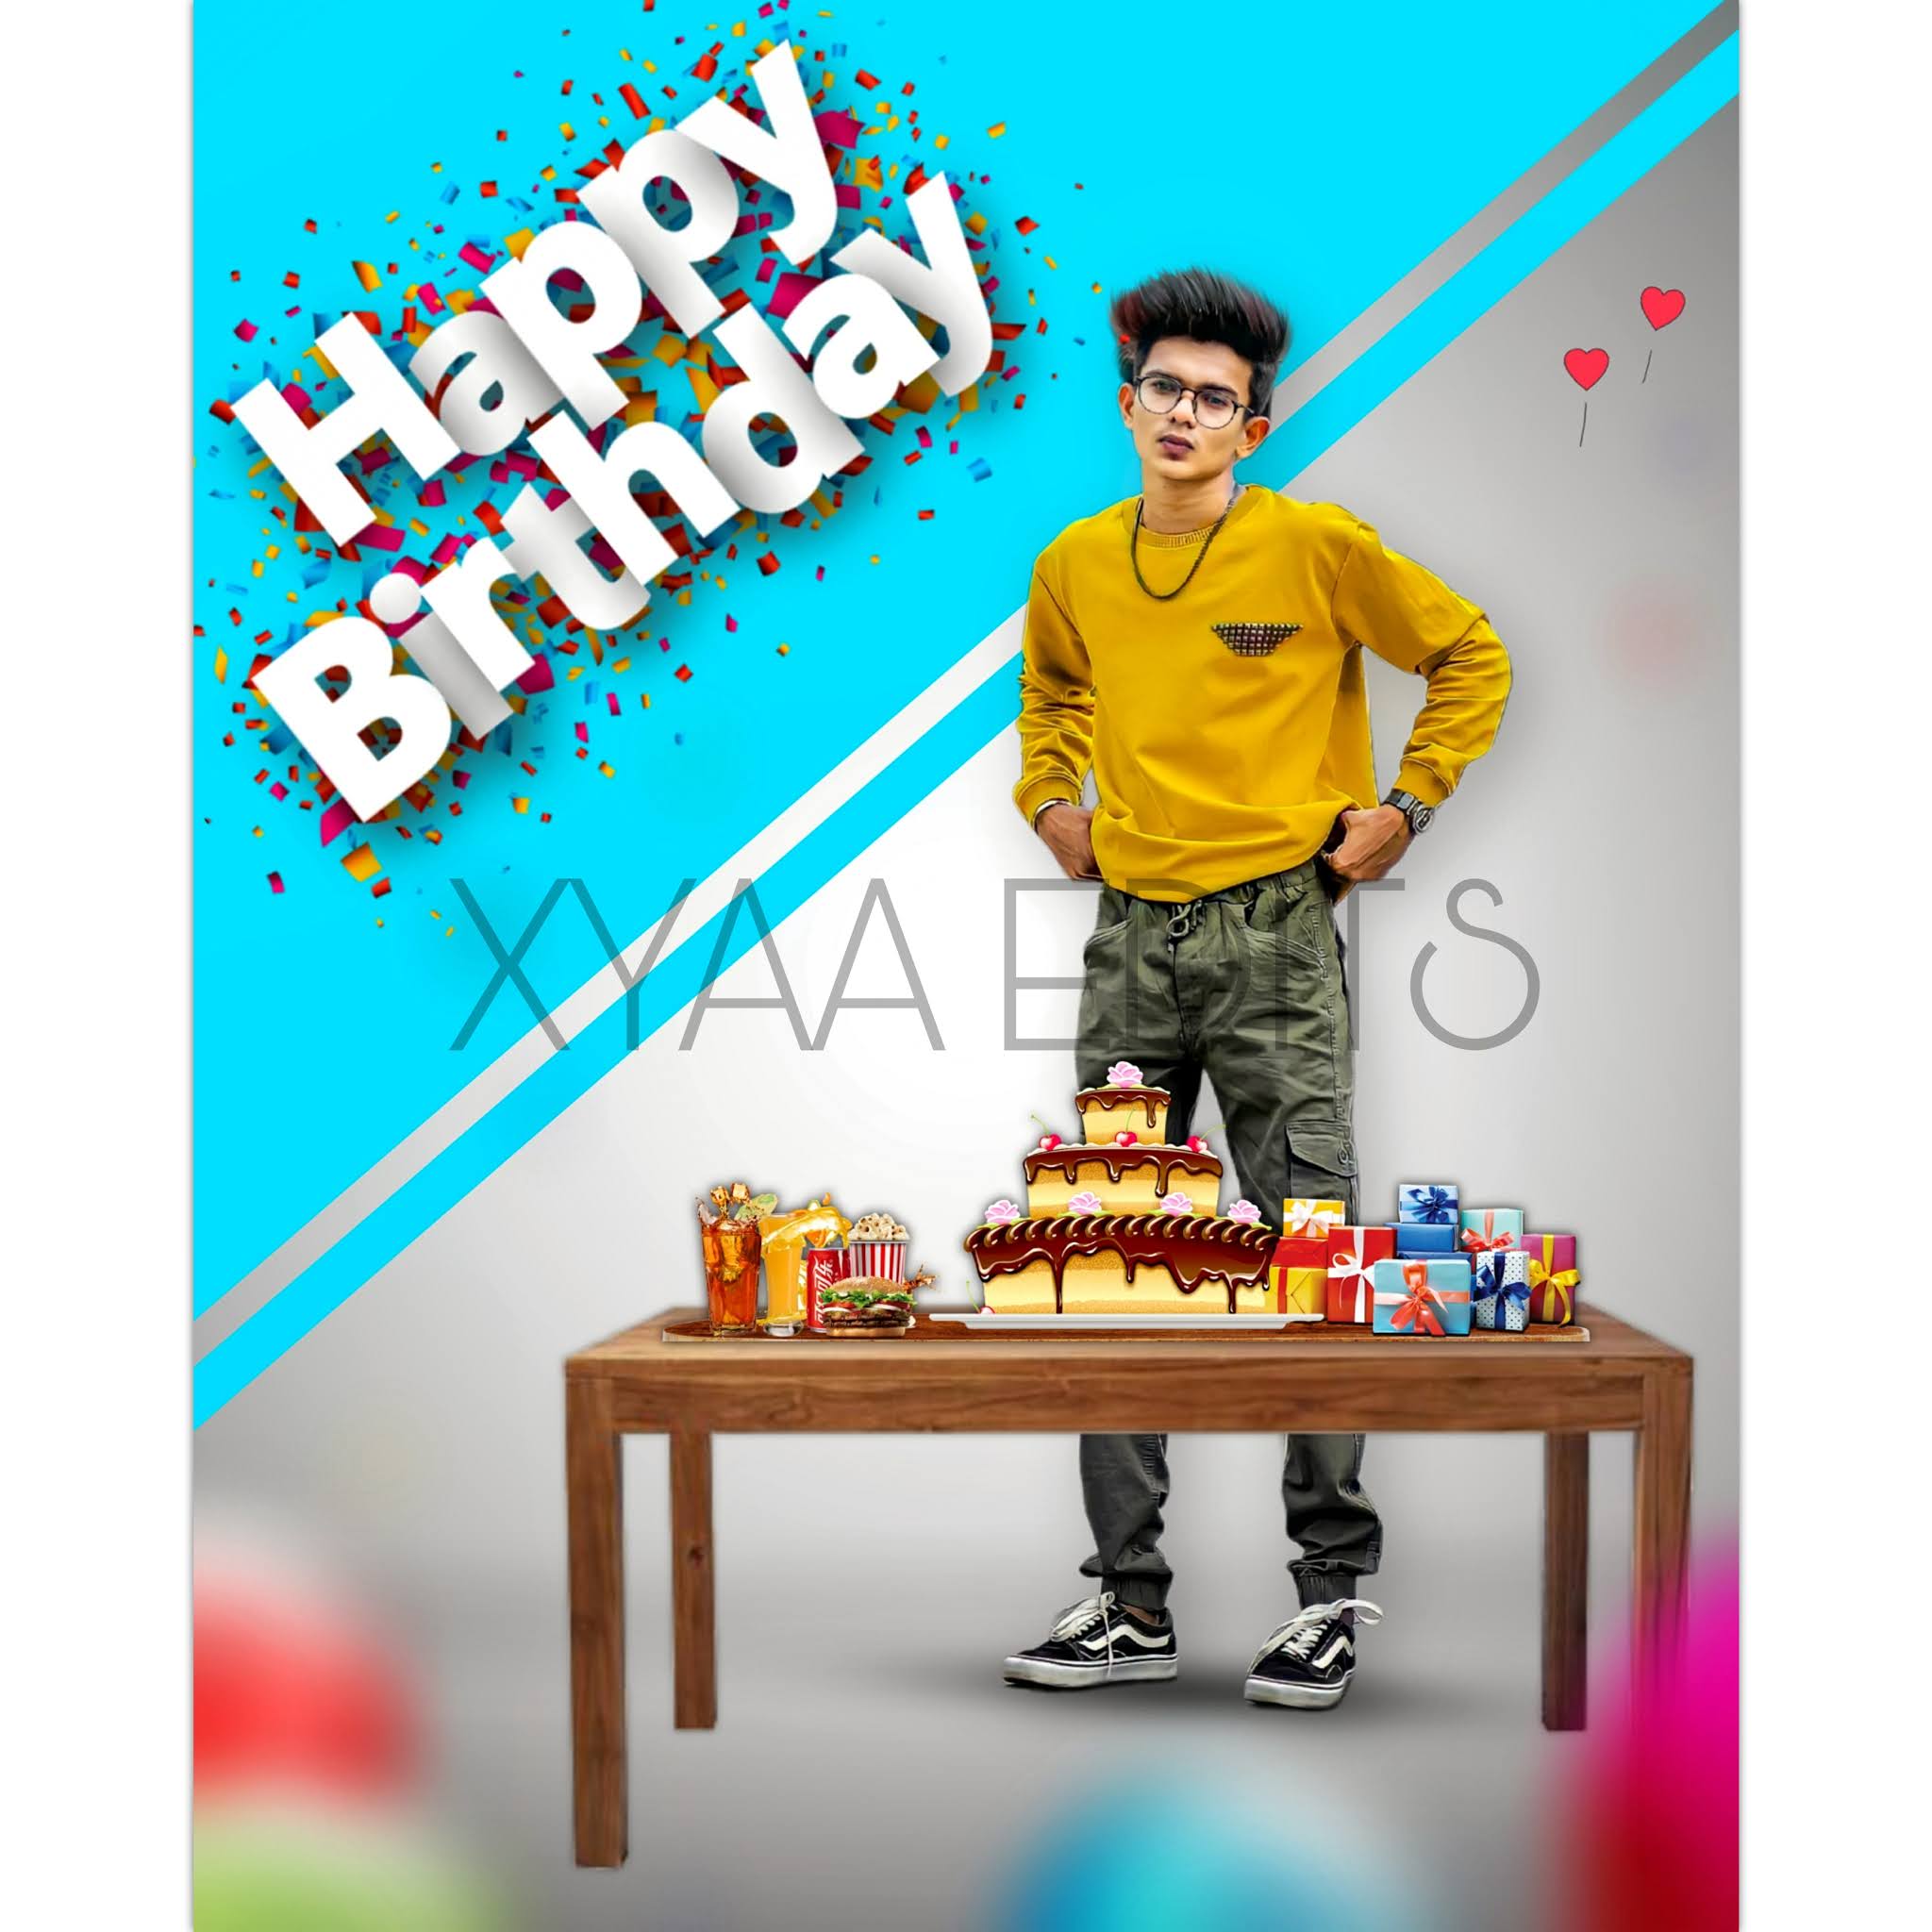 Step by step guide for Birthday editing picsart background with Picsart